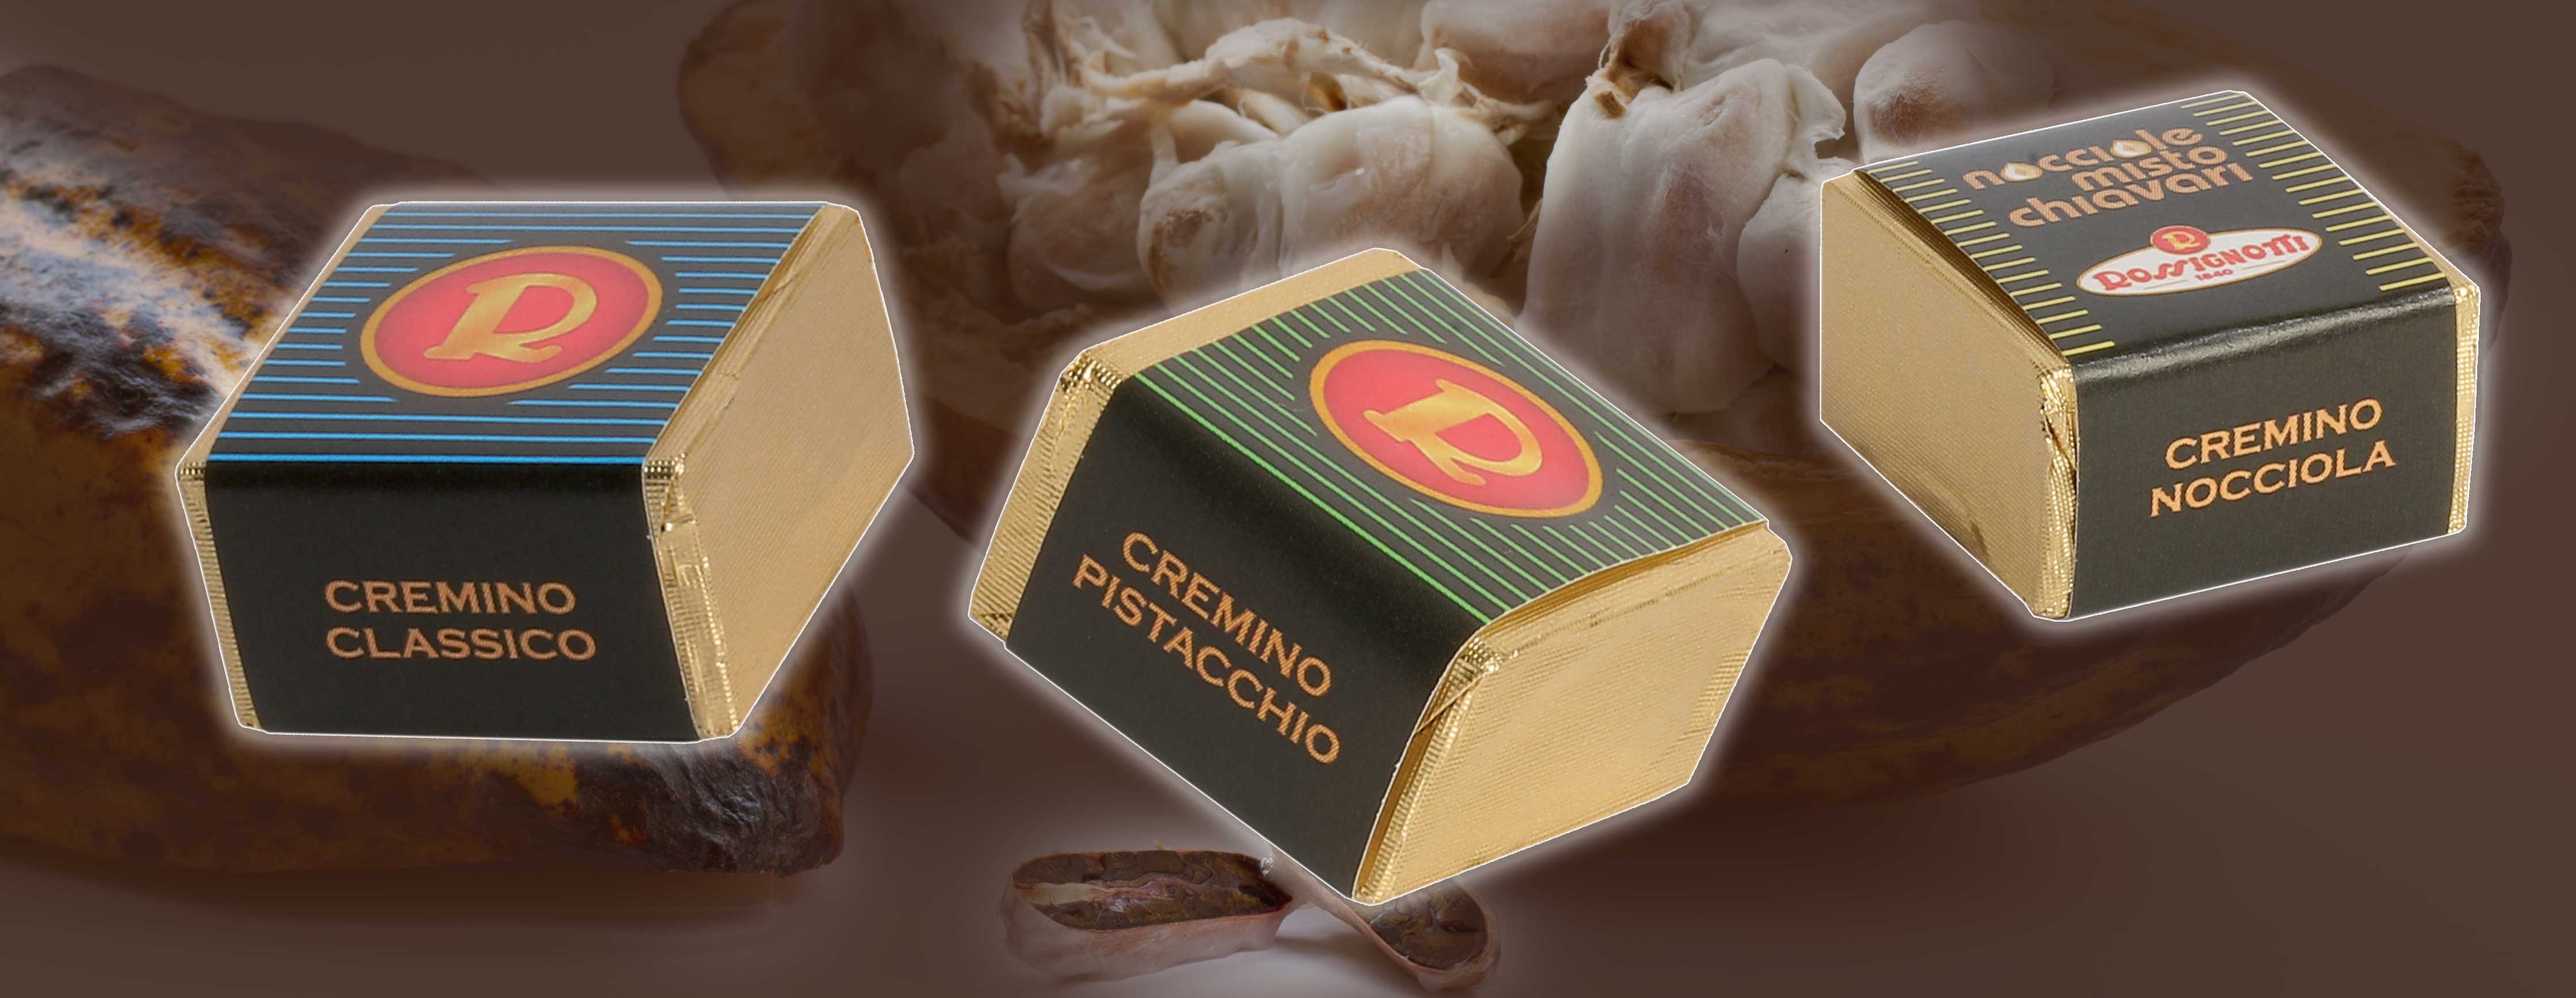 Packaging_rossignotti